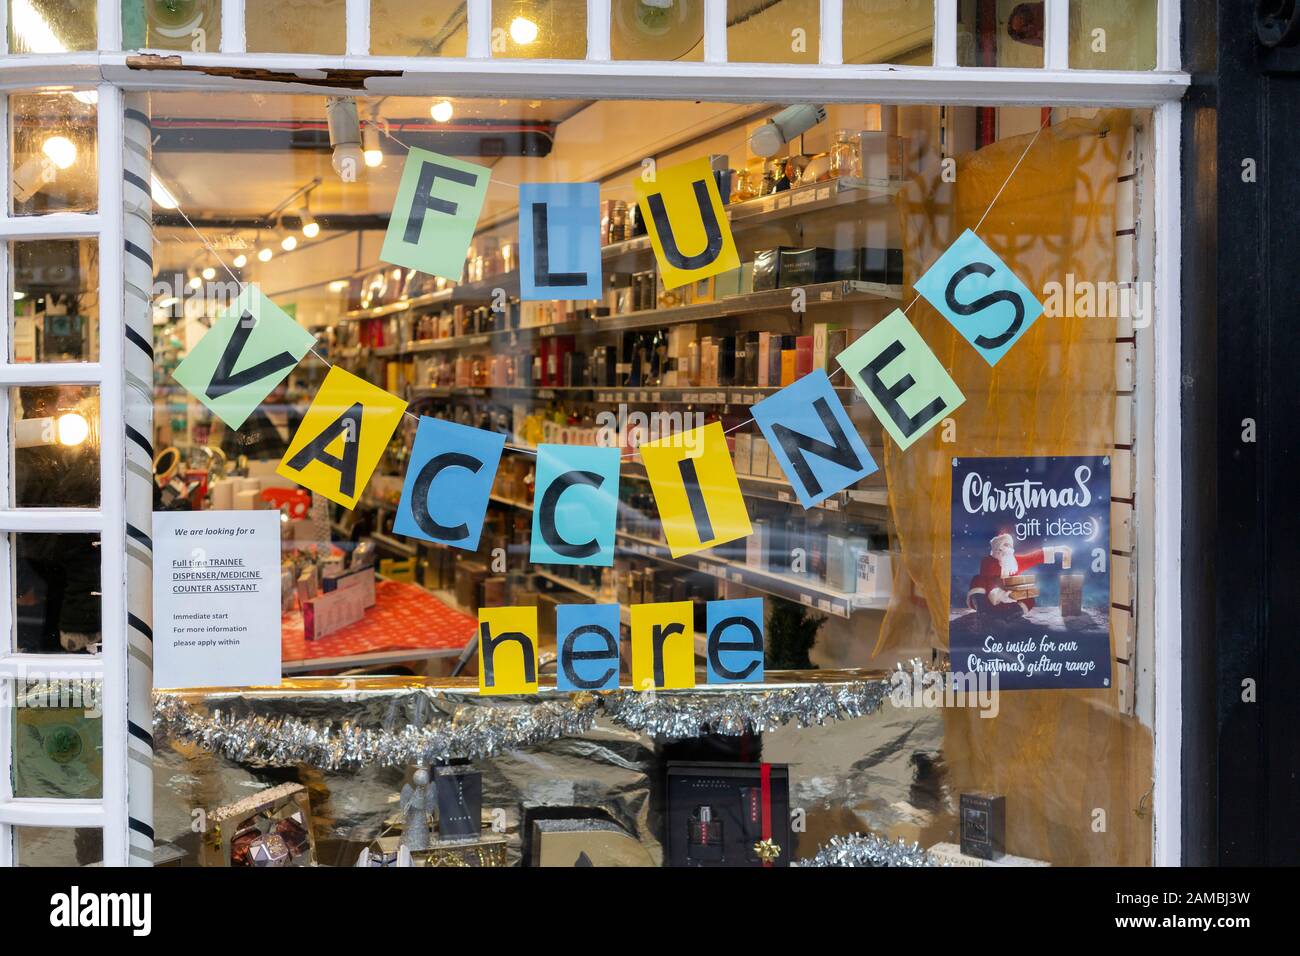 A sign saying flu vaccines here in the window of Stratford Pharmacy, Stratford-upon-Avon at winter time, UK Stock Photo